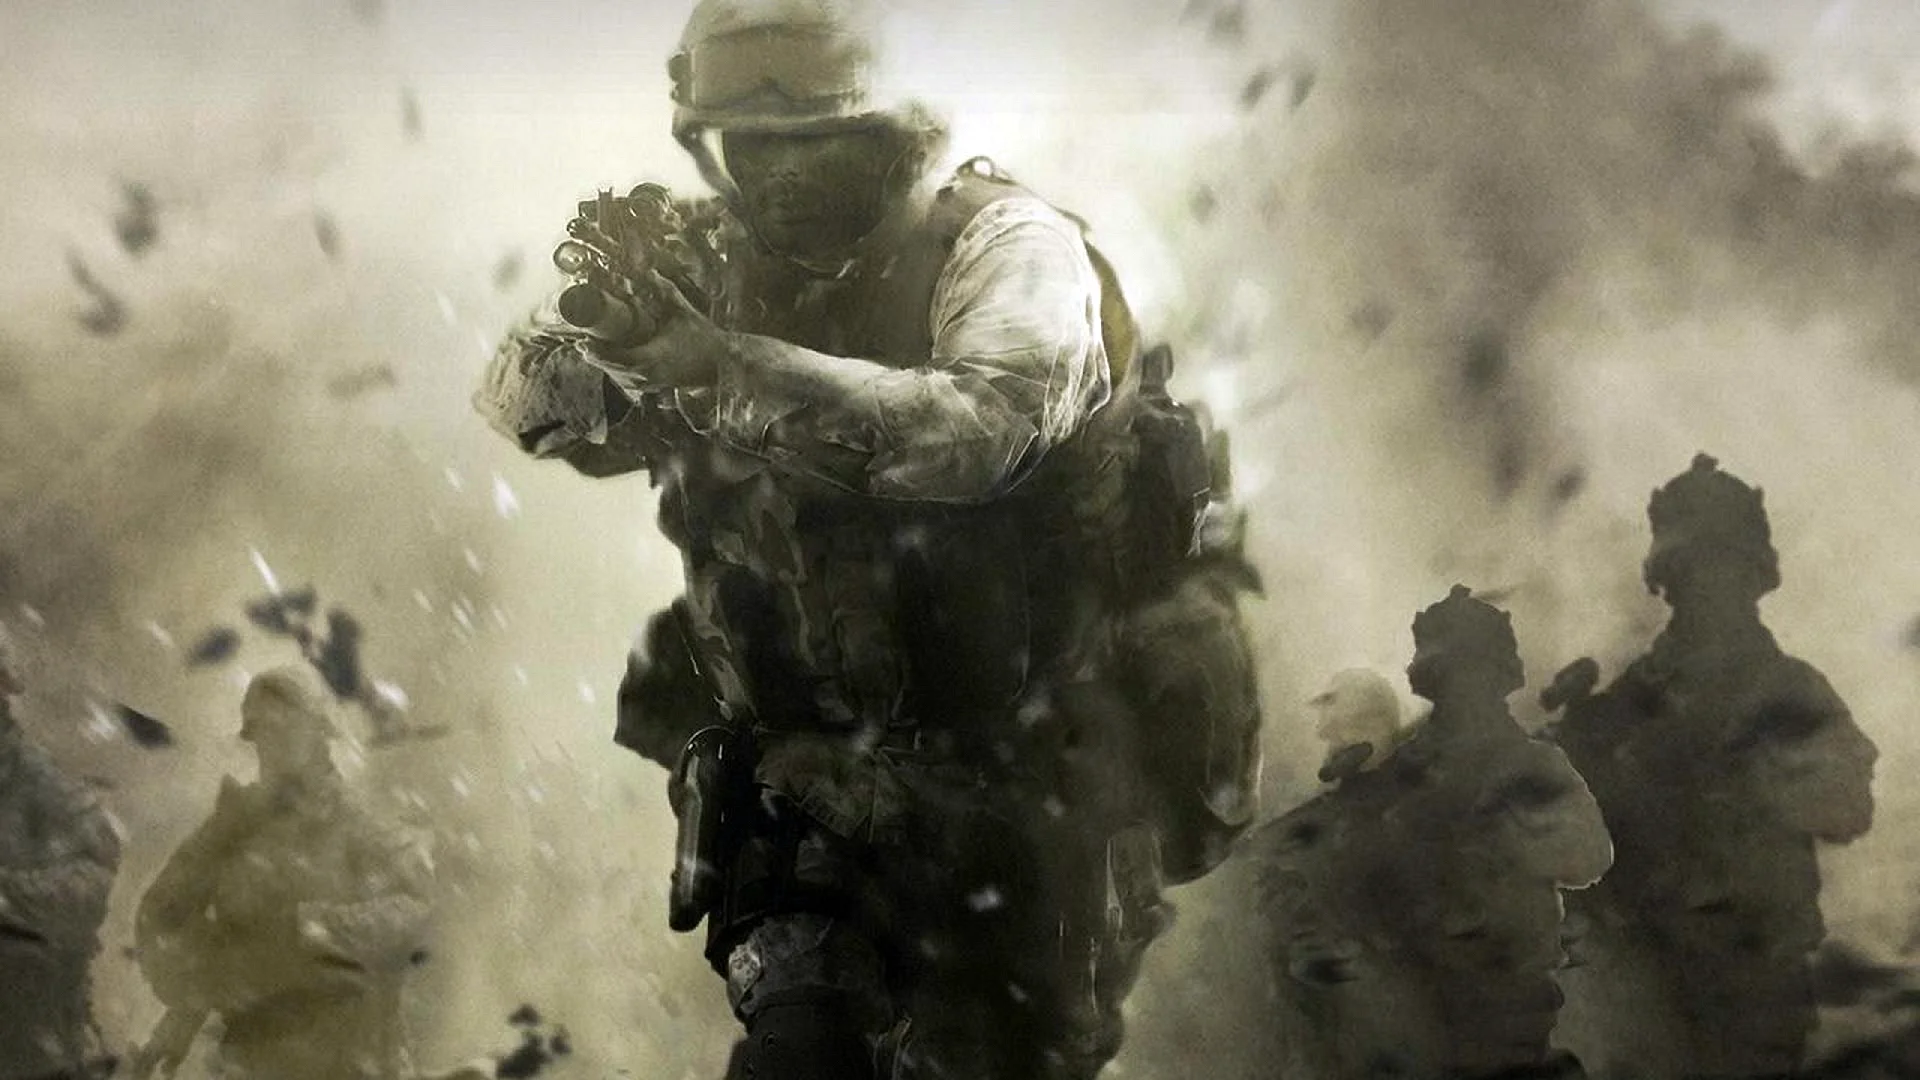 Call of Duty Soldier Wallpaper